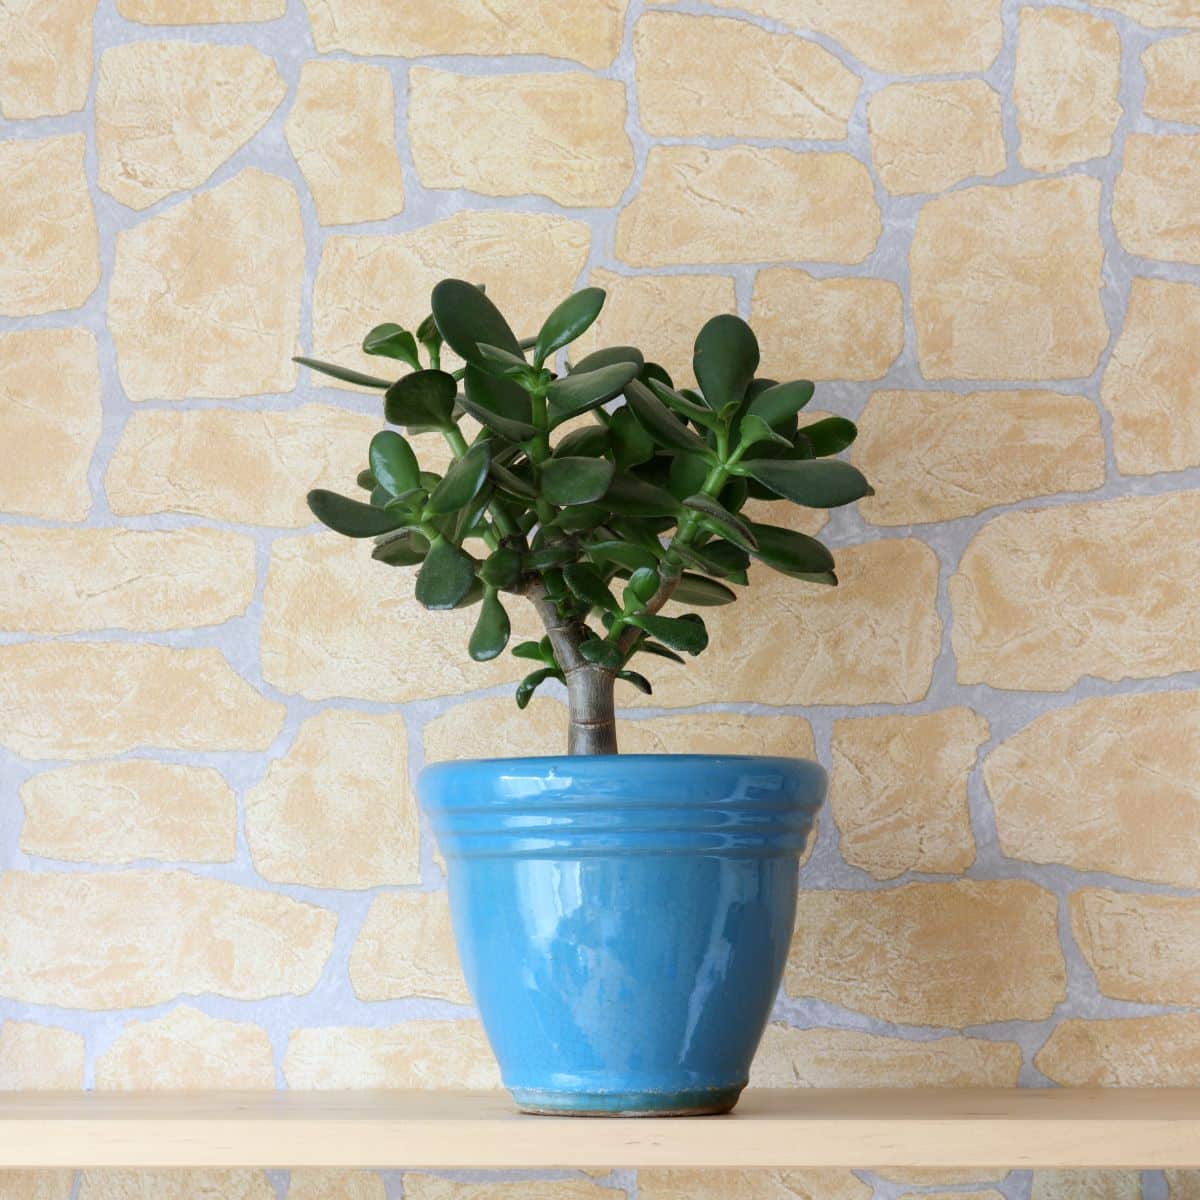 A Jade Plant growing in a blue pot.